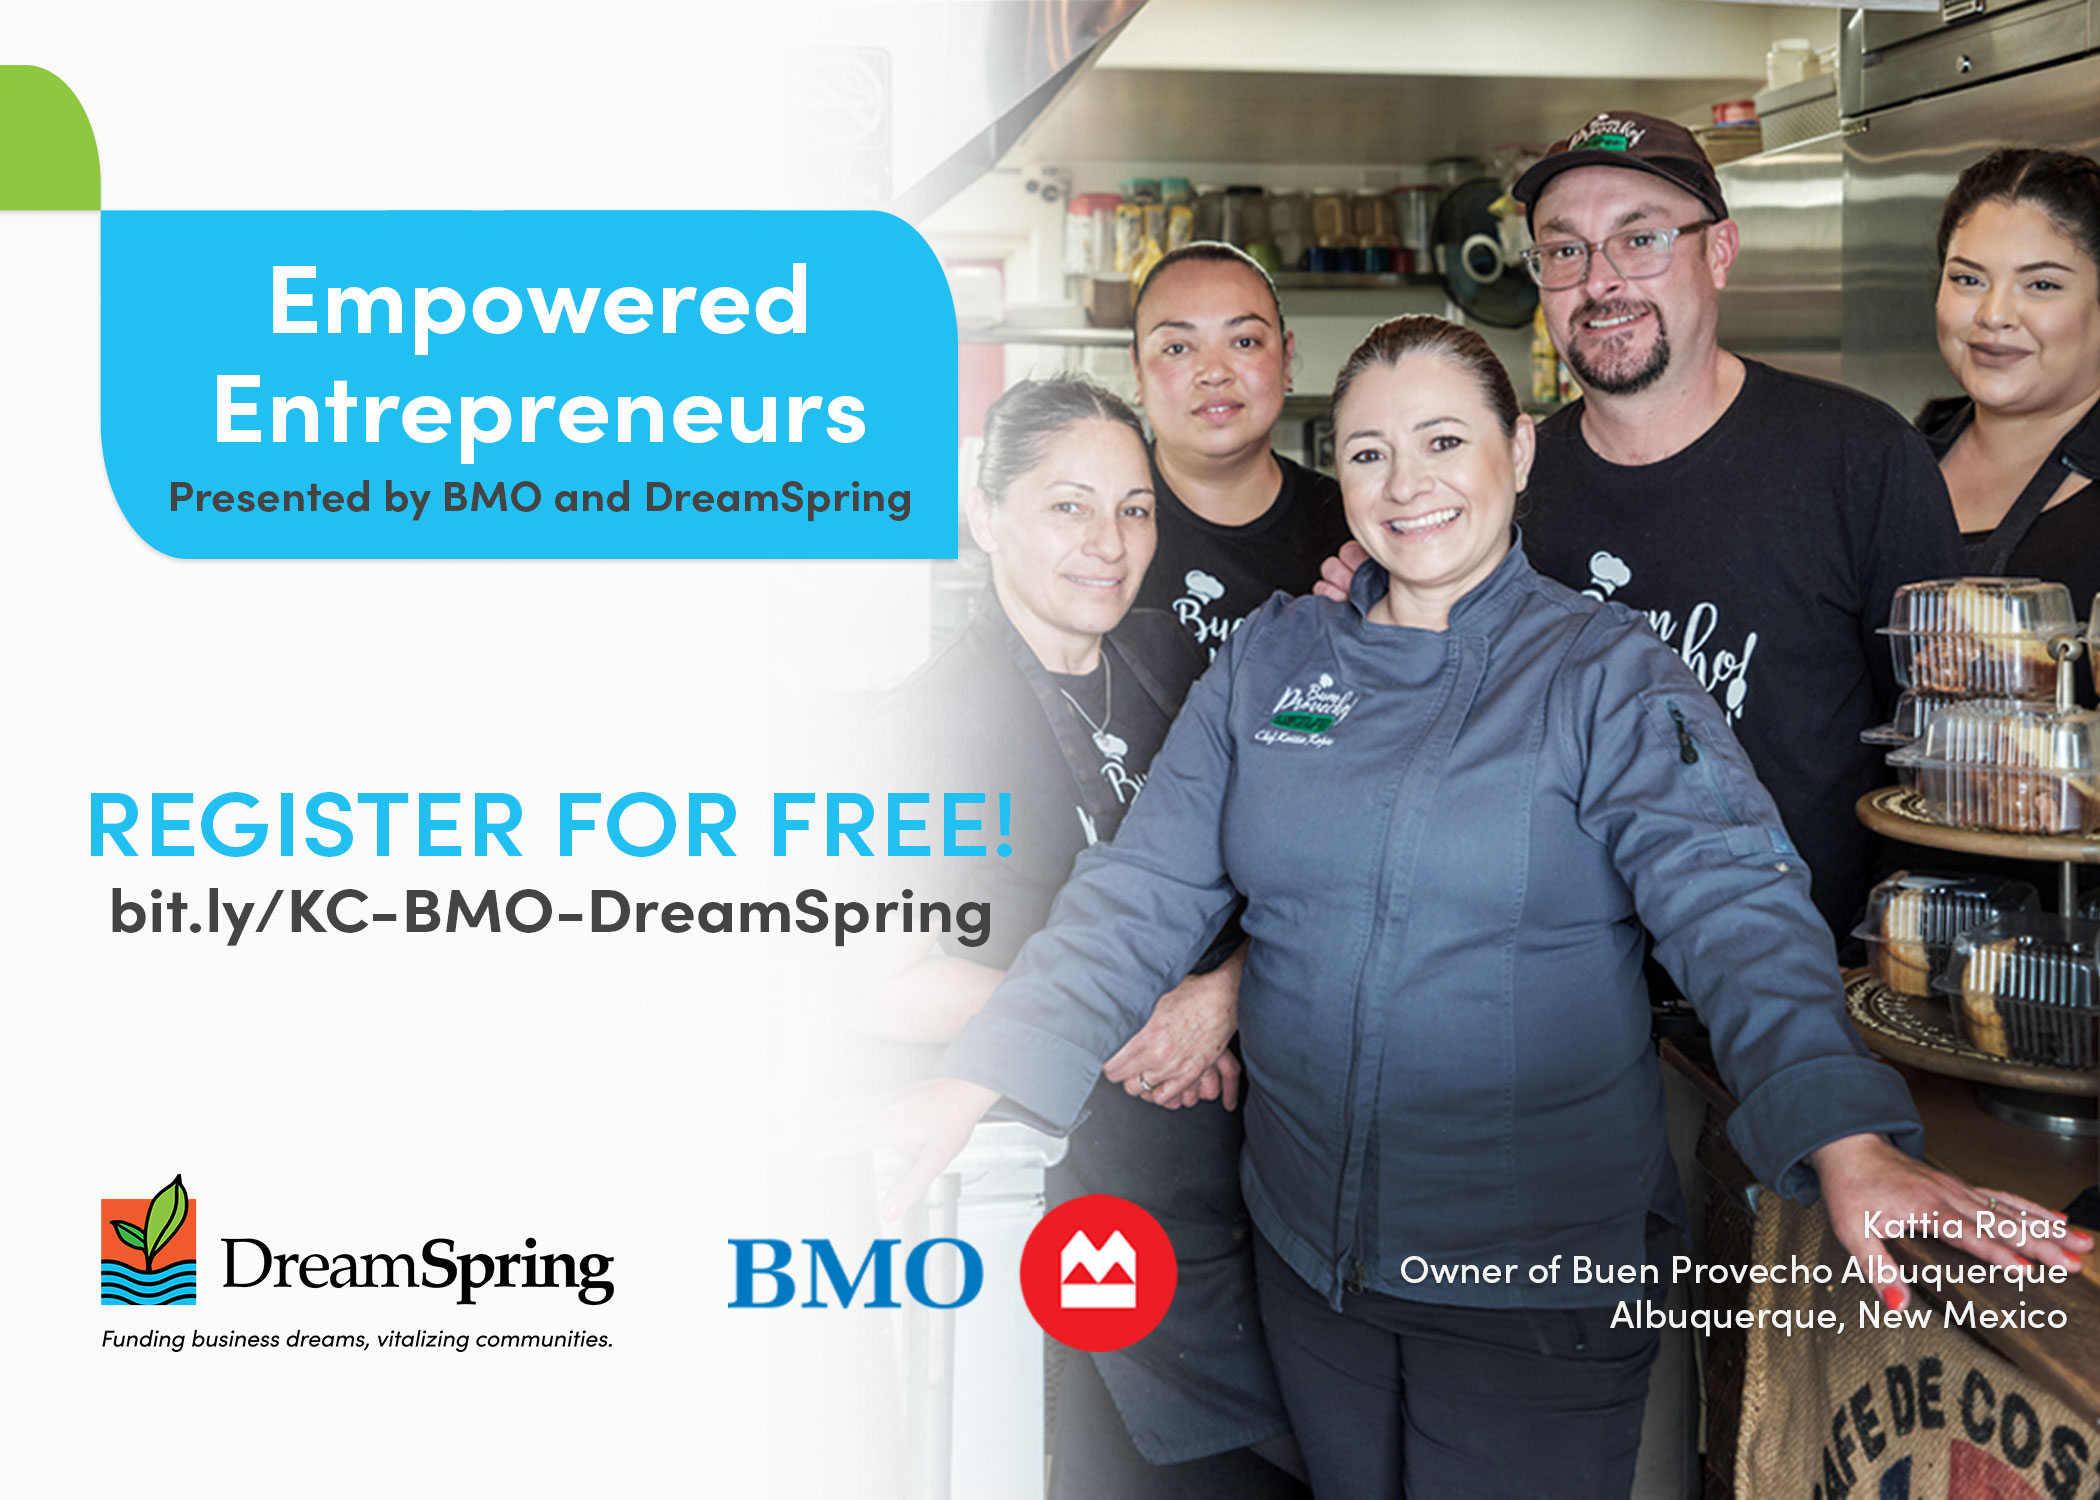 Kansas City “Empowered Entrepreneurs” Summit with BMO featured image